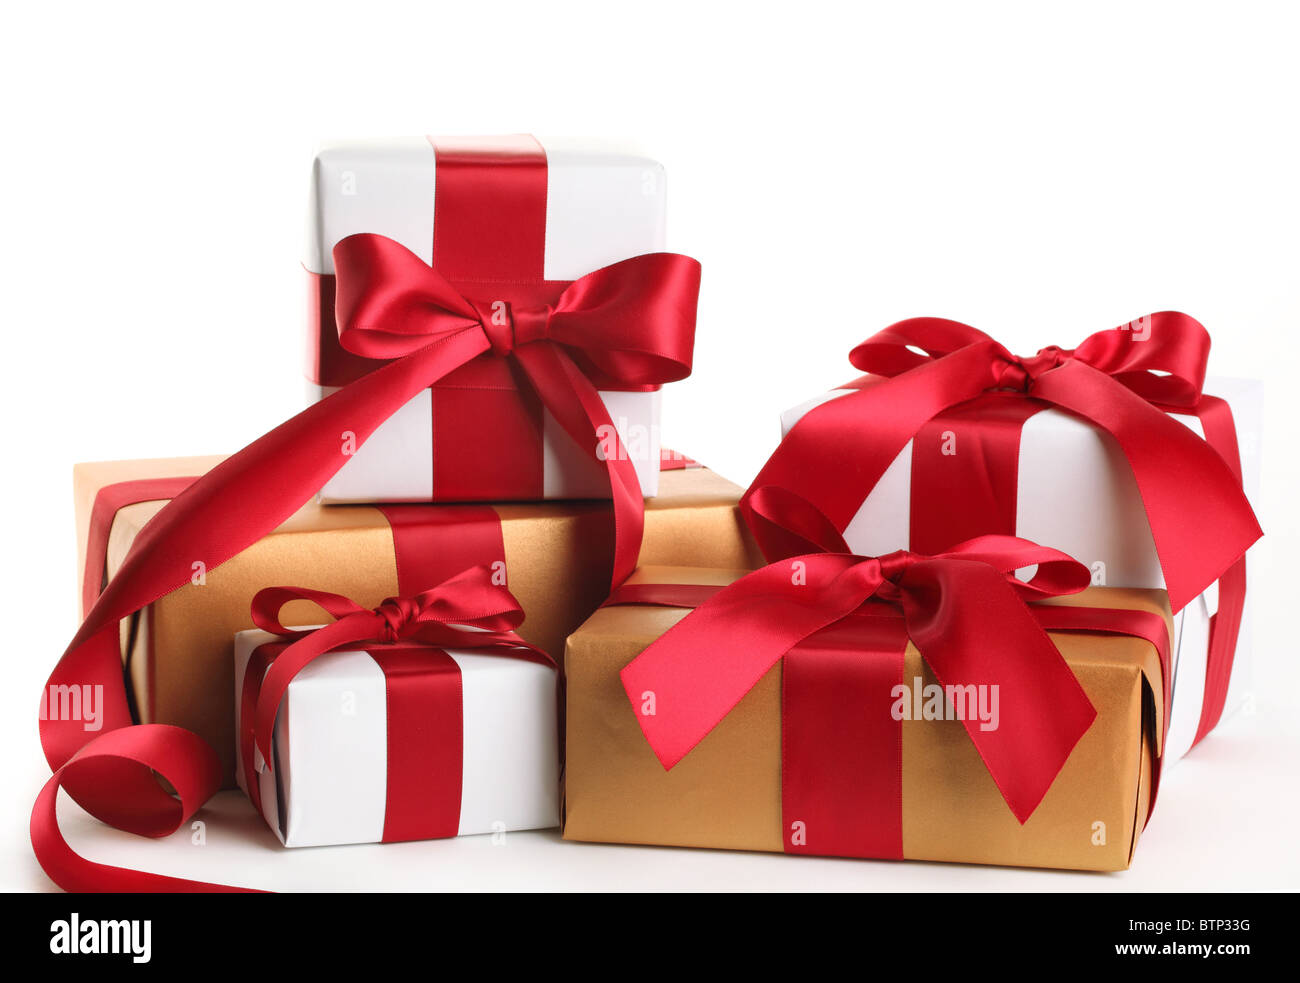 Gift boxes tied with a red satin ribbon bow. Stock Photo